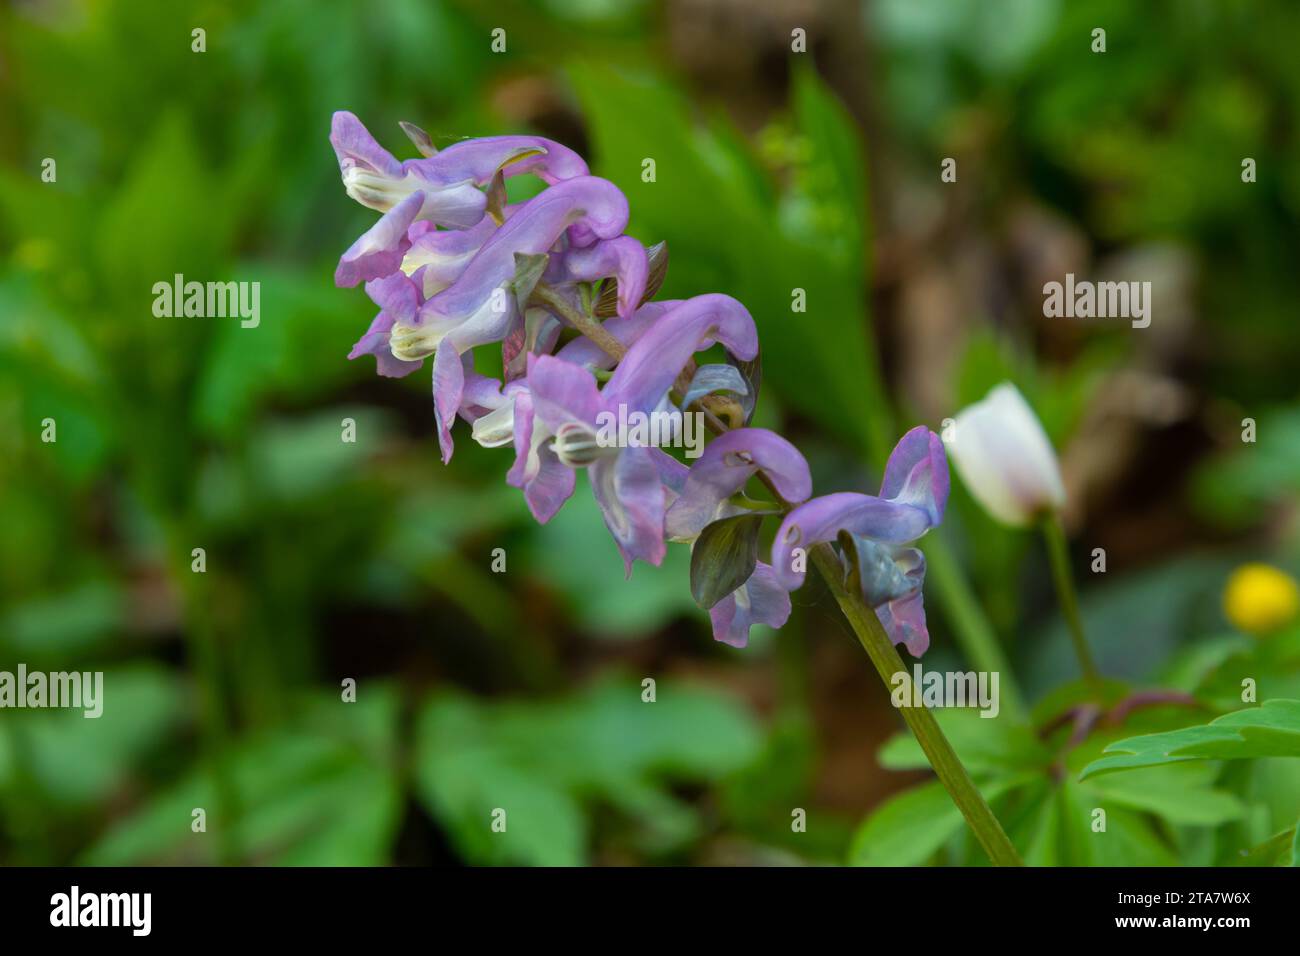 Hollow-root, Corydalis cava, blooming on the forest floor in a park during spring. Stock Photo